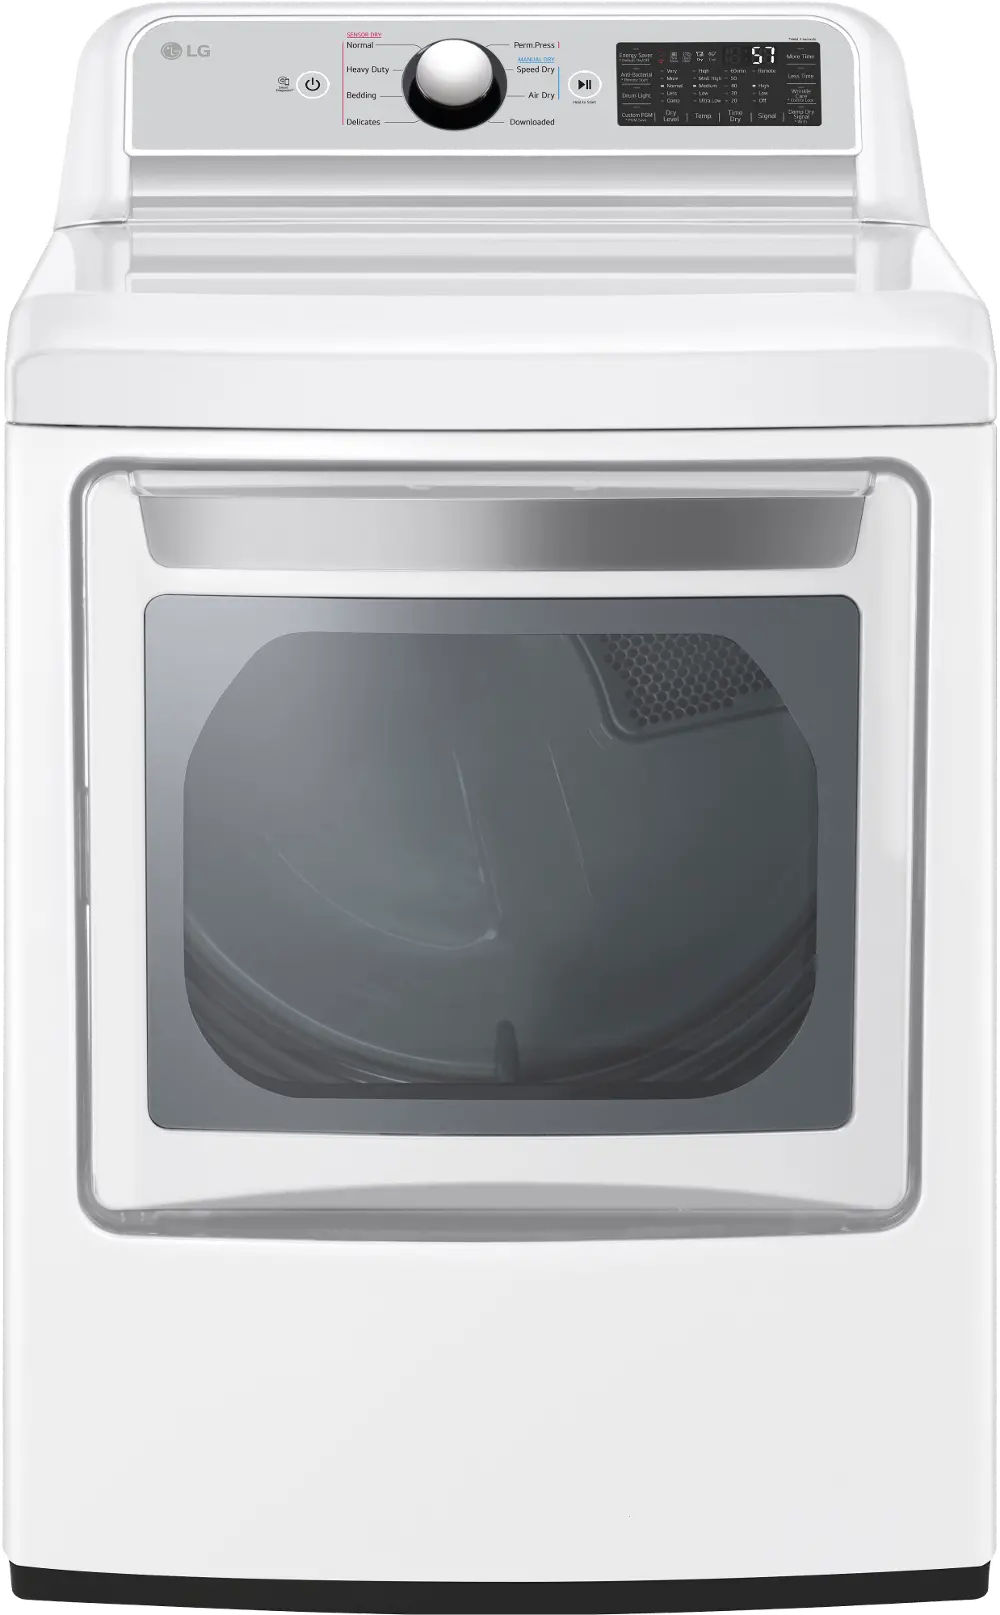 DLE7400WE LG 7.4 cu ft Electric Dryer - White-1